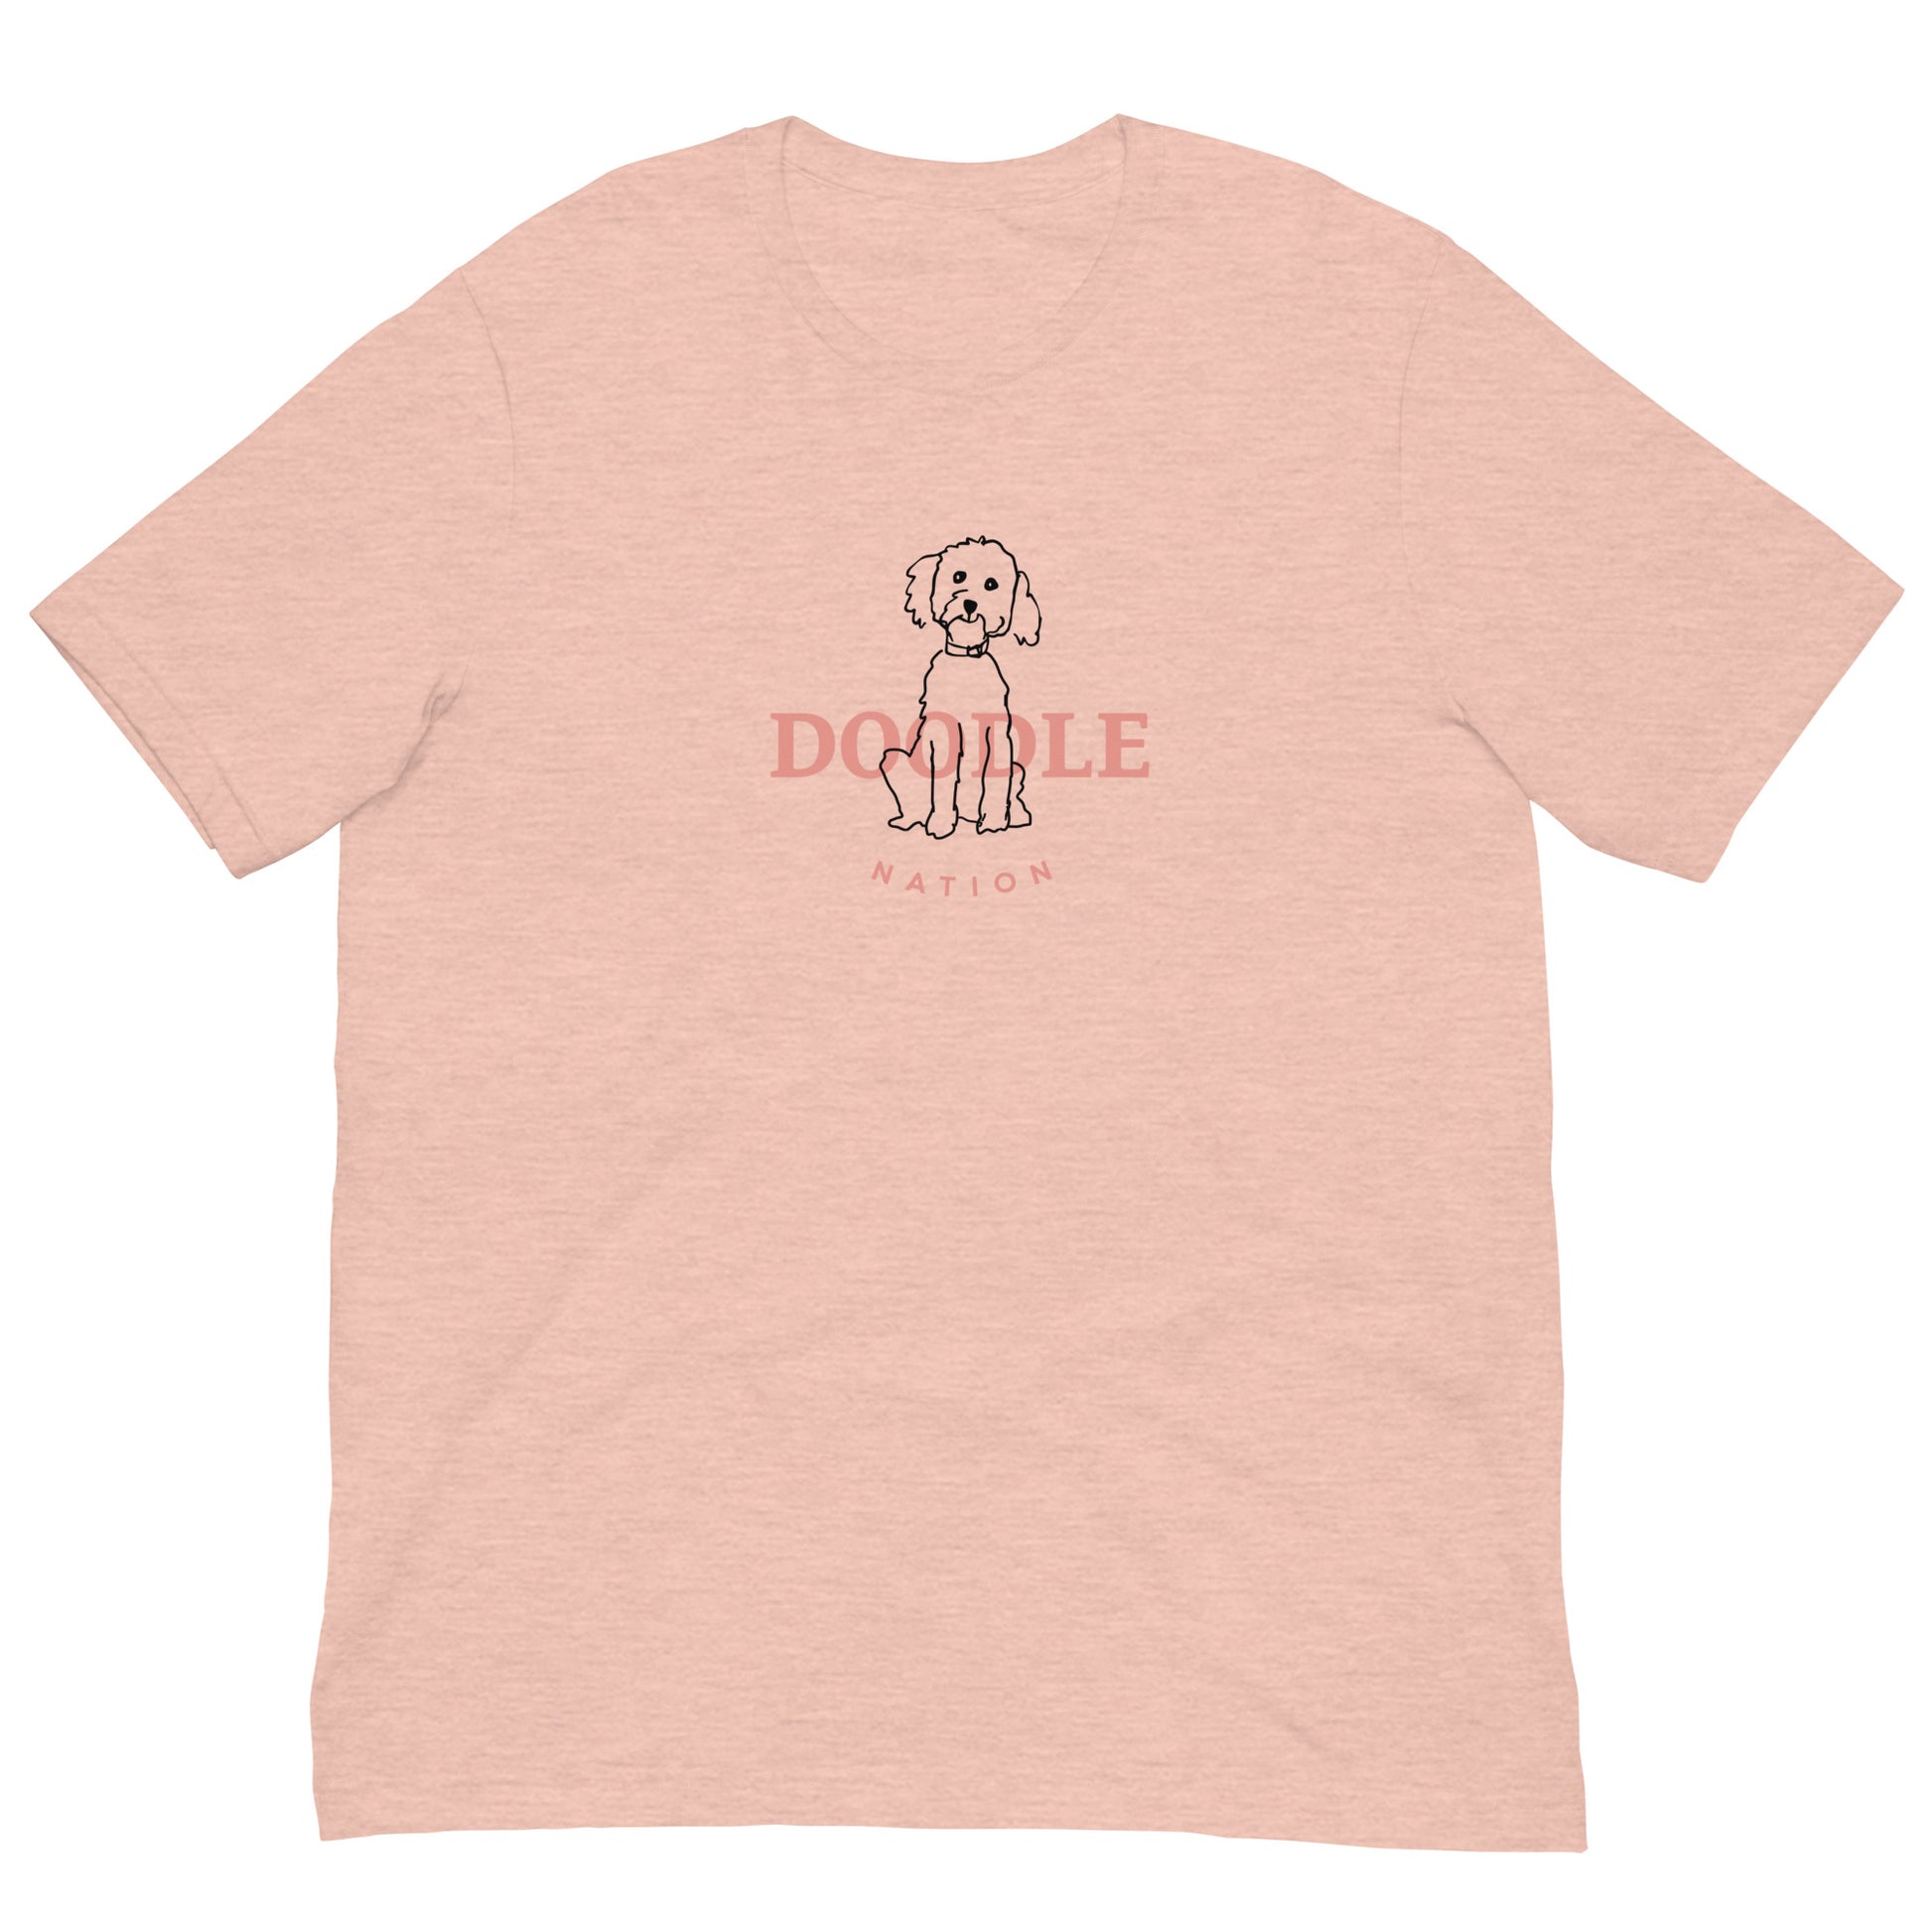 Goldendoodle t-shirt with Goldendoodle and words "Doodle Nation" in heather prism peach color